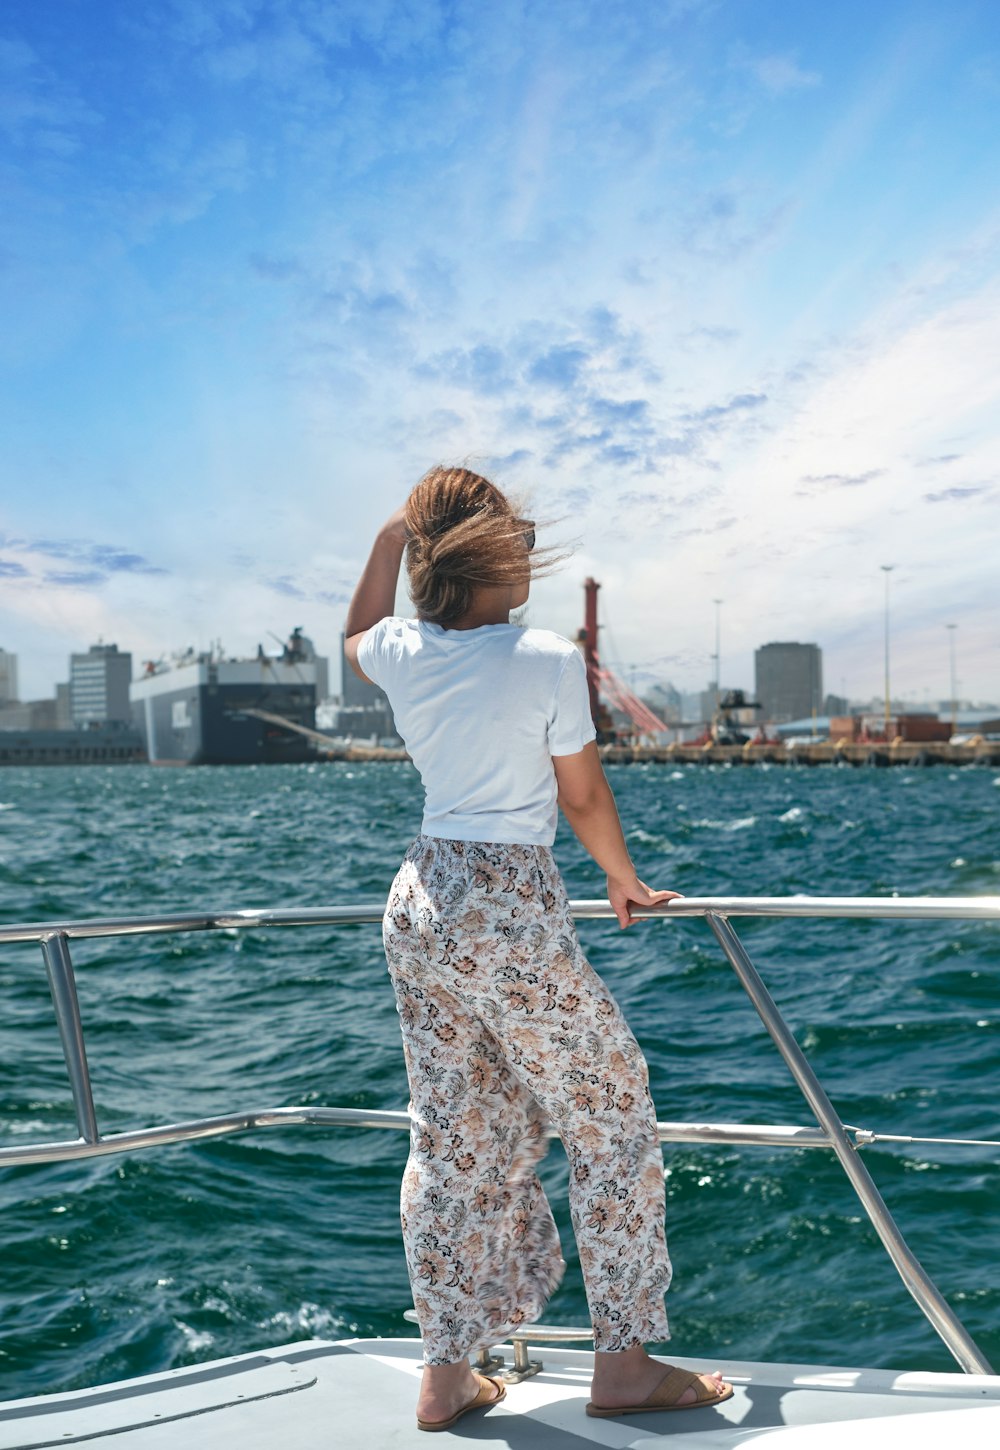 woman in white t-shirt and brown floral skirt standing on boat during daytime